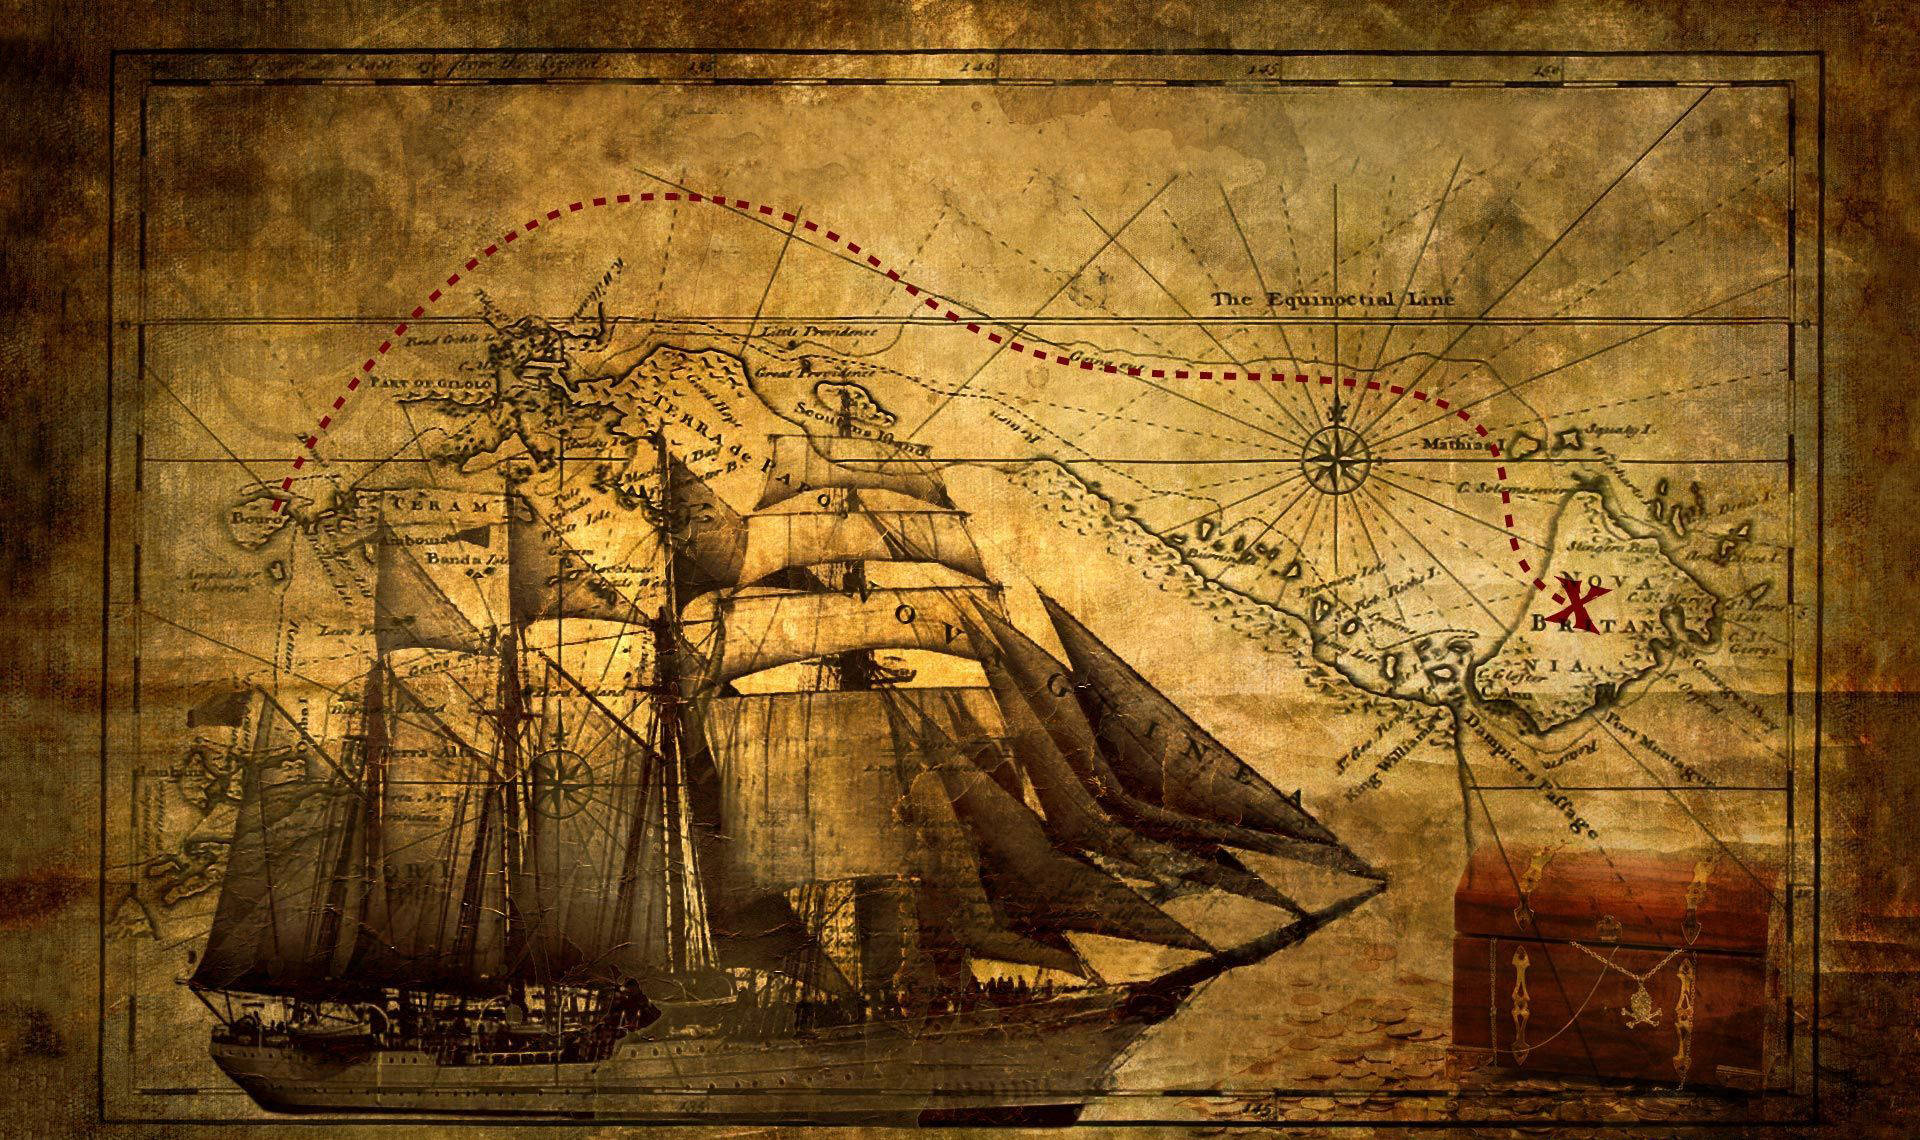 A vintage map of an old ship - Pirate